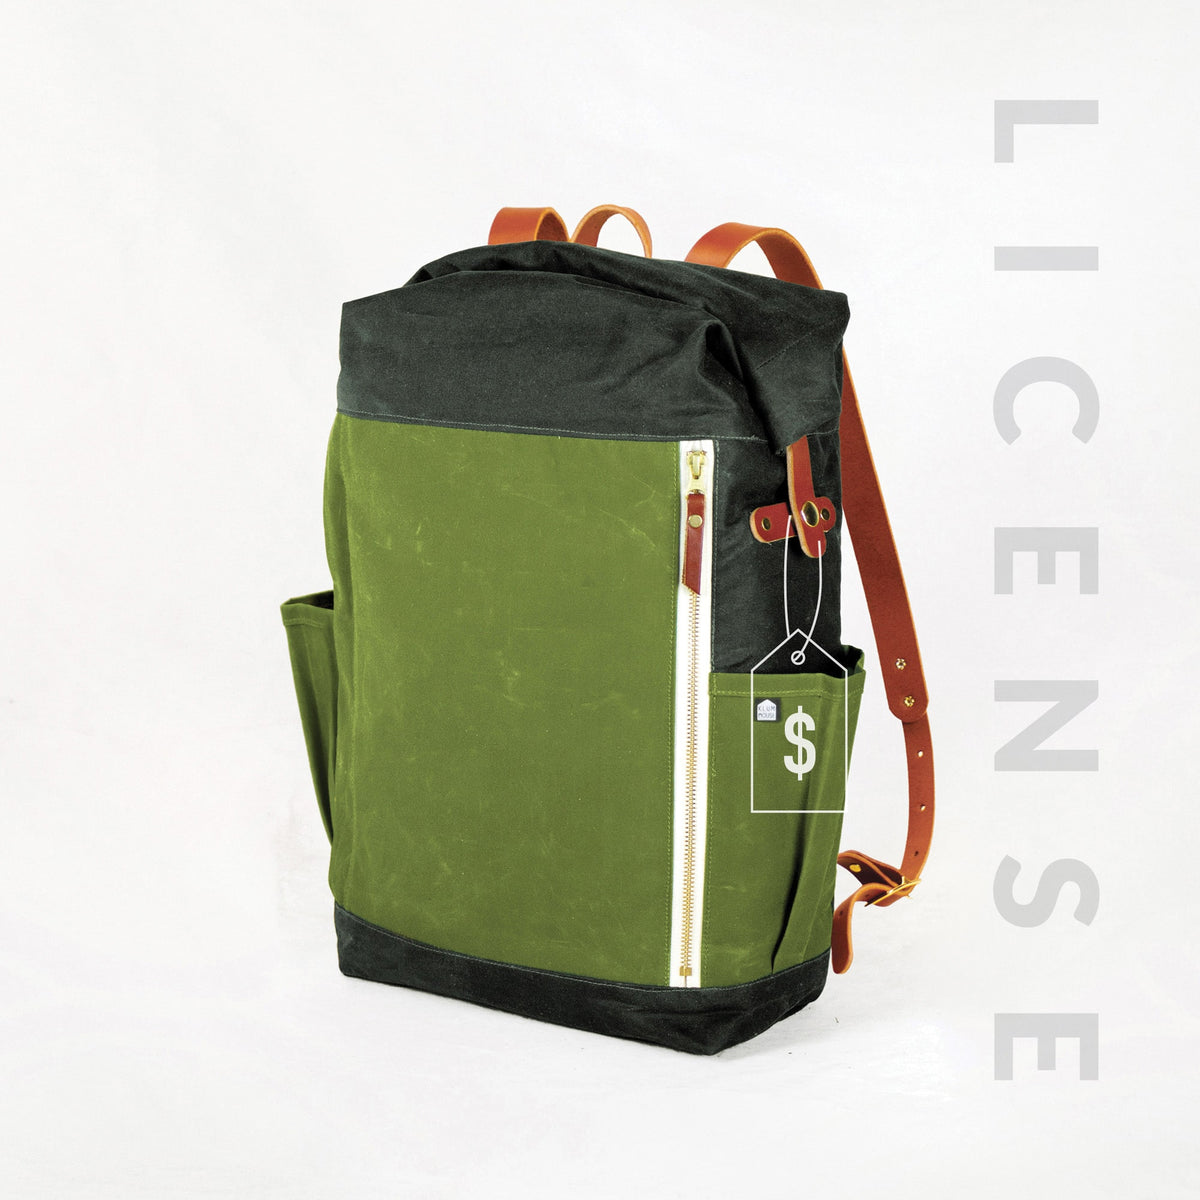 Slabtown Backpack - License to Sell